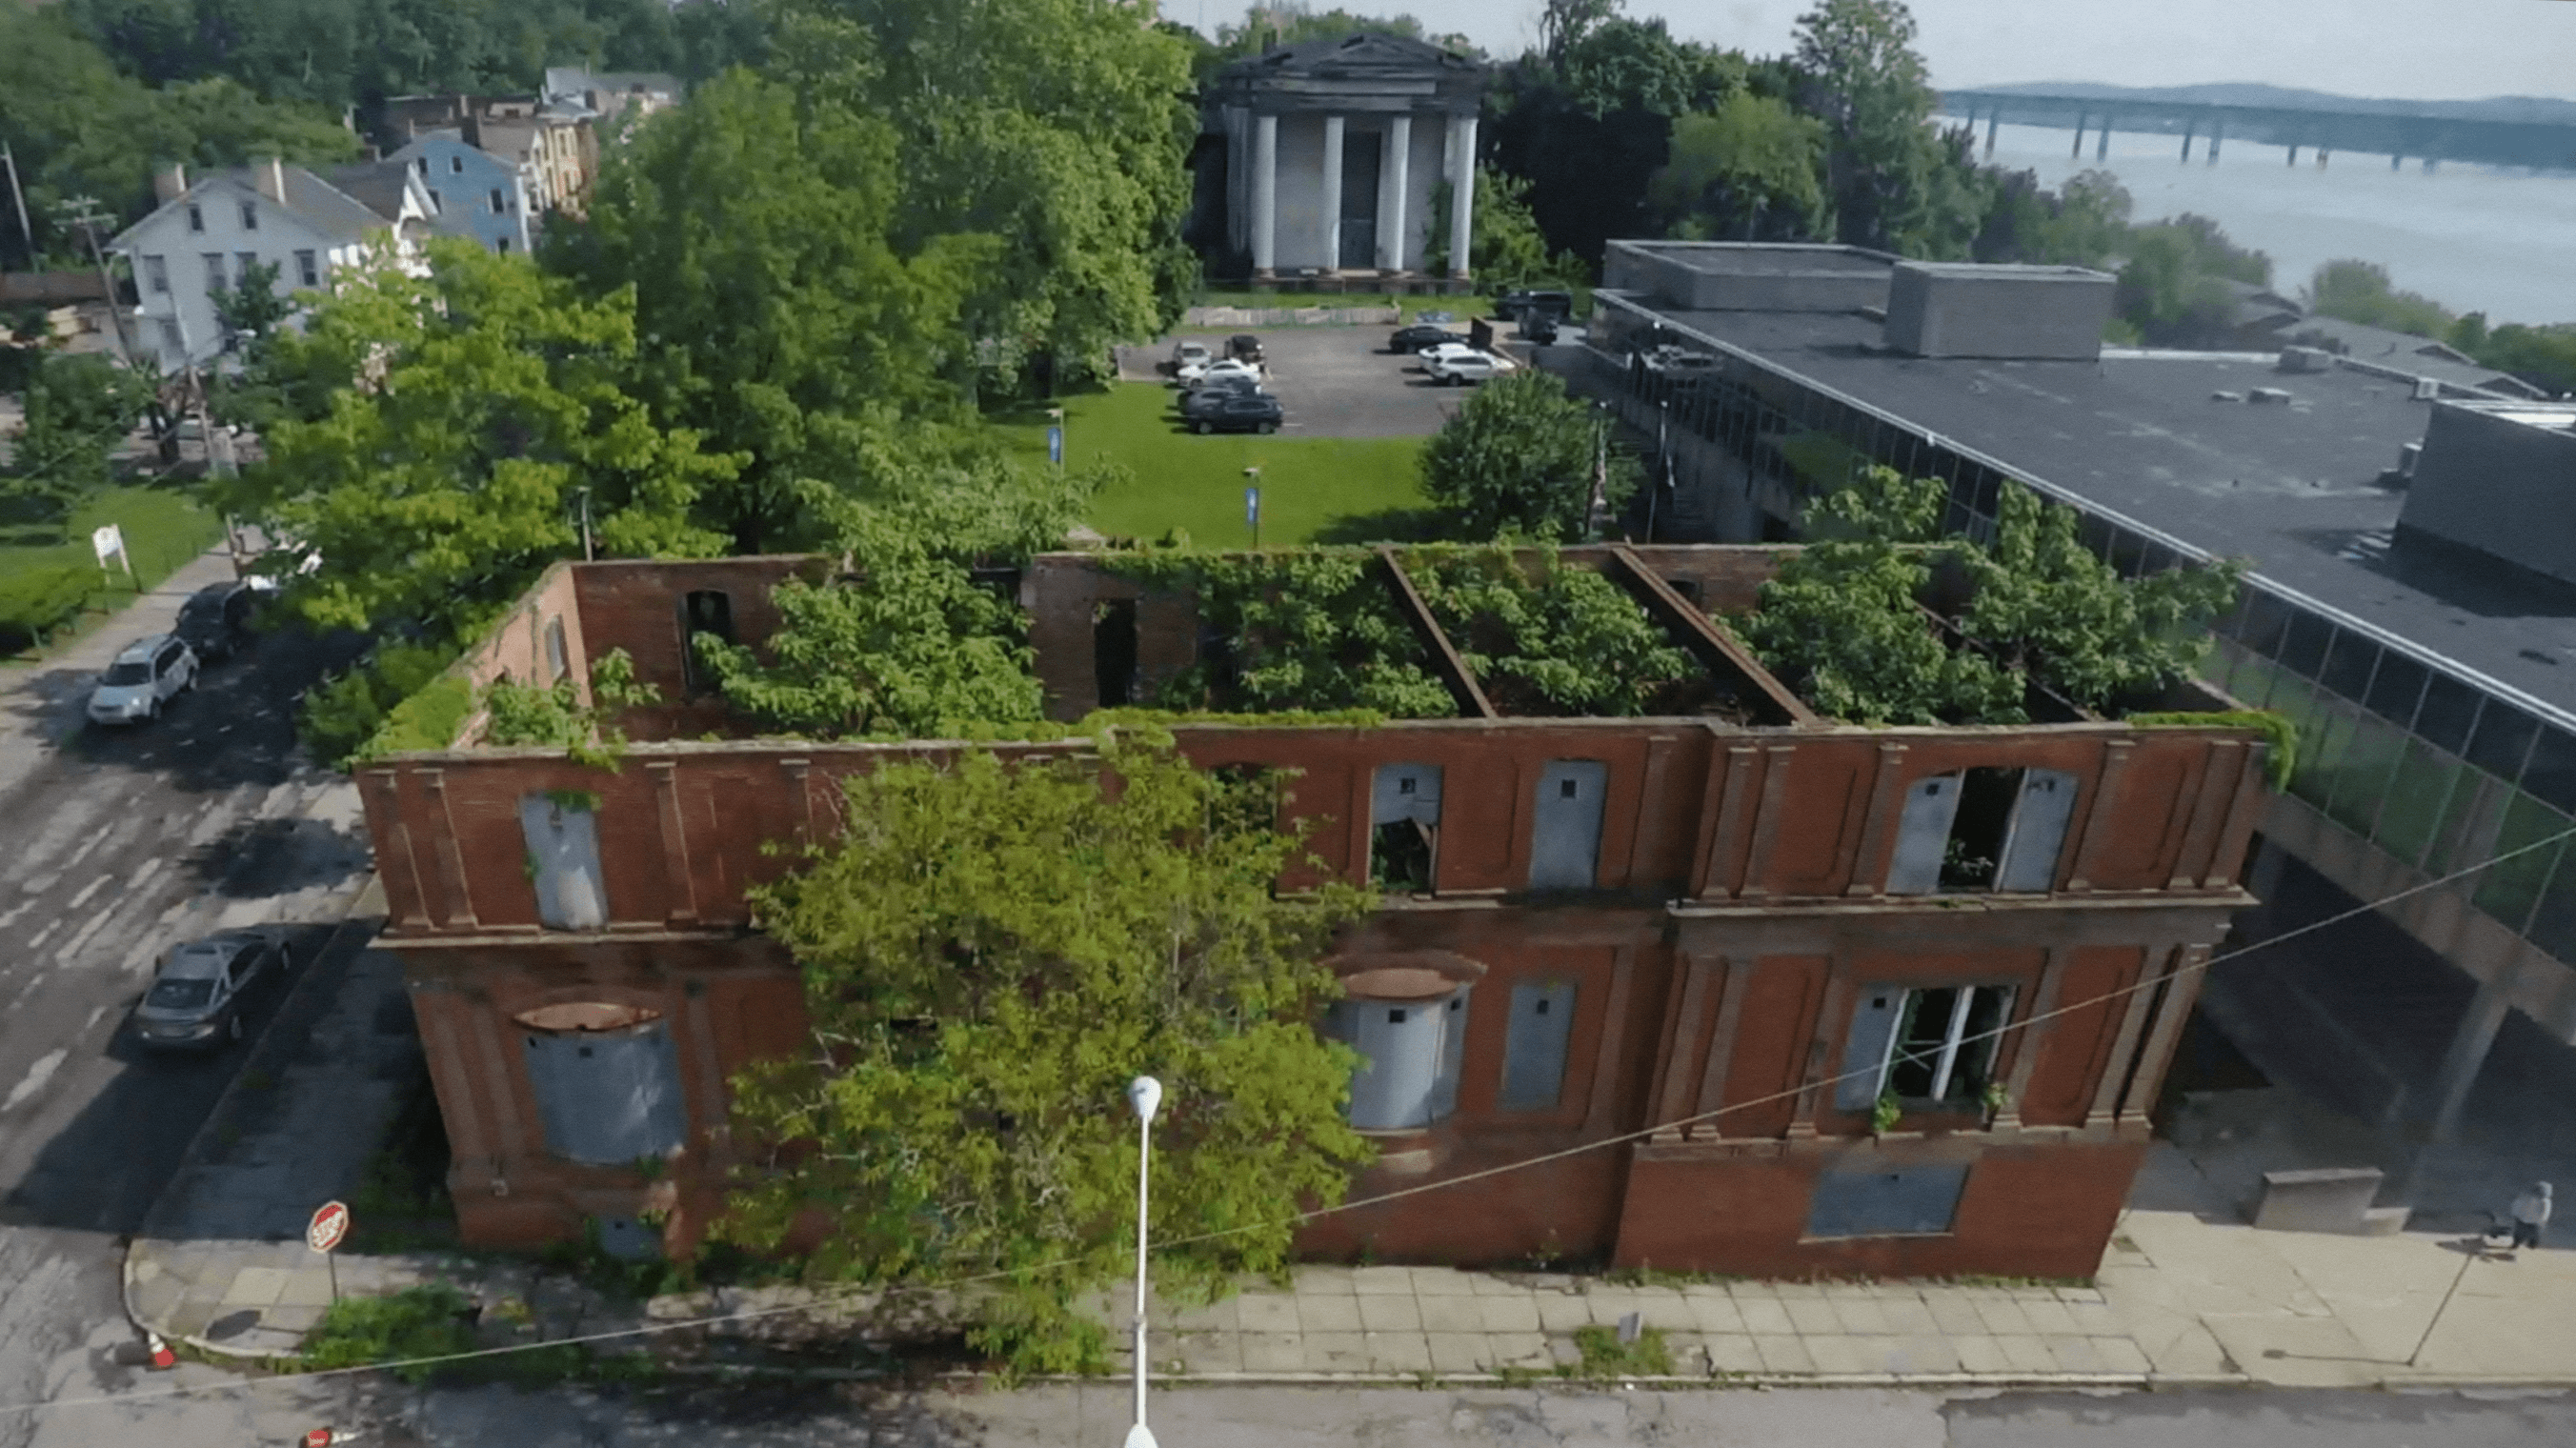 aerial view of a gutted historic building with plants and trees growing inside